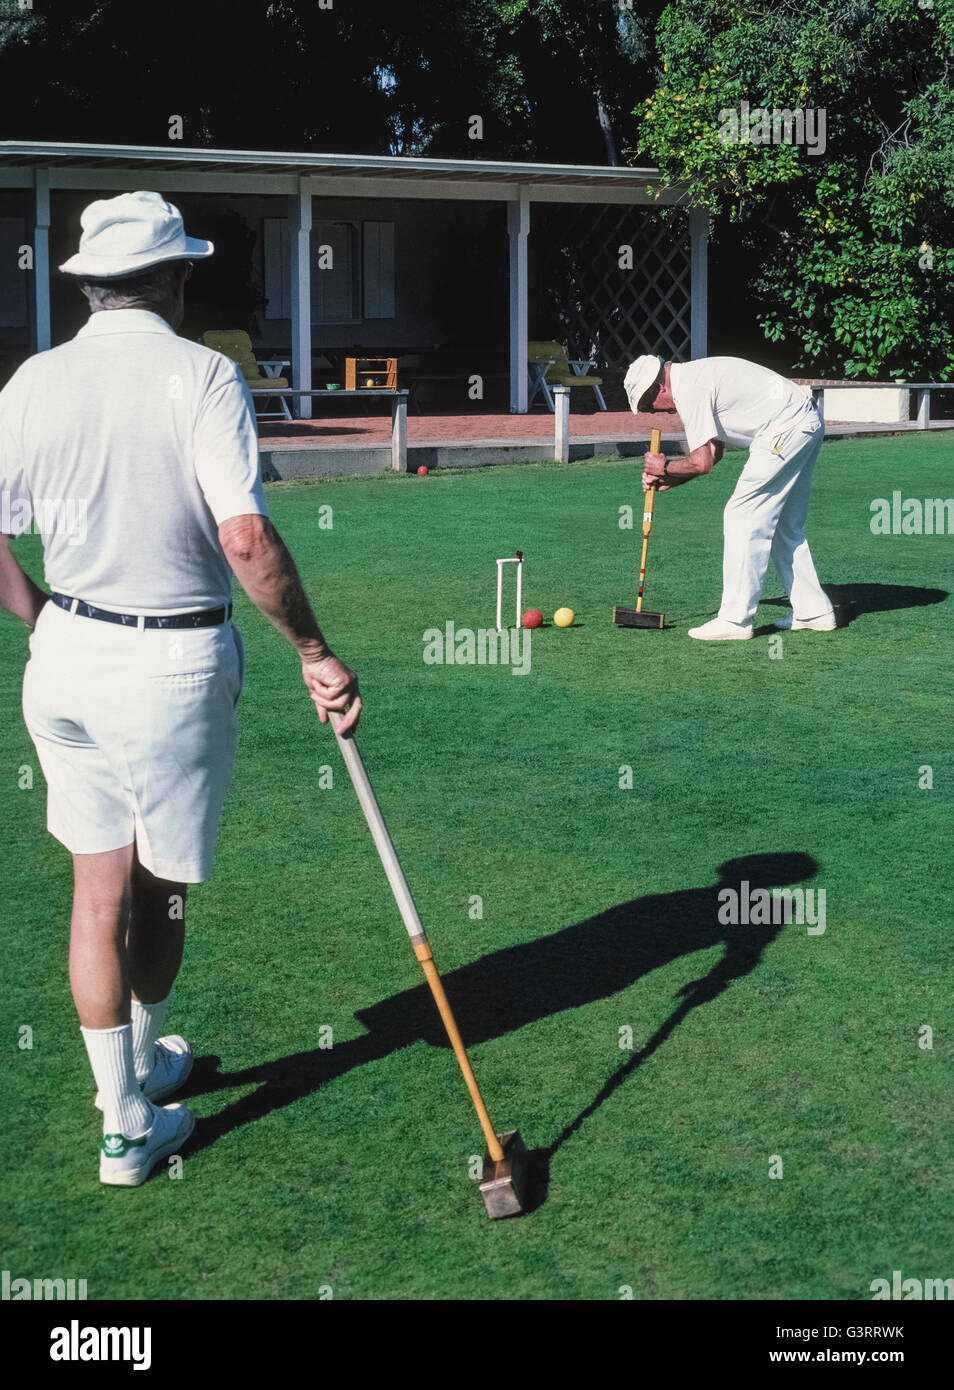 The traditional game of croquet is a popular activity for members of the the local croquet club who dress in all white apparel, as well as for guests at The Inn at Rancho Santa Fe, both of whom play on the sprawling front lawn of that luxury hotel in San Diego County, California, USA. Club members follow the official rules of the U.S. Croquet Association for Six-Wicket American Croquet that specify the equipment to be used, including the mallets, balls, wickets and stake. Here a male club player strikes his yellow ball with a square wooden mallet into an opponent's red ball. Stock Photo